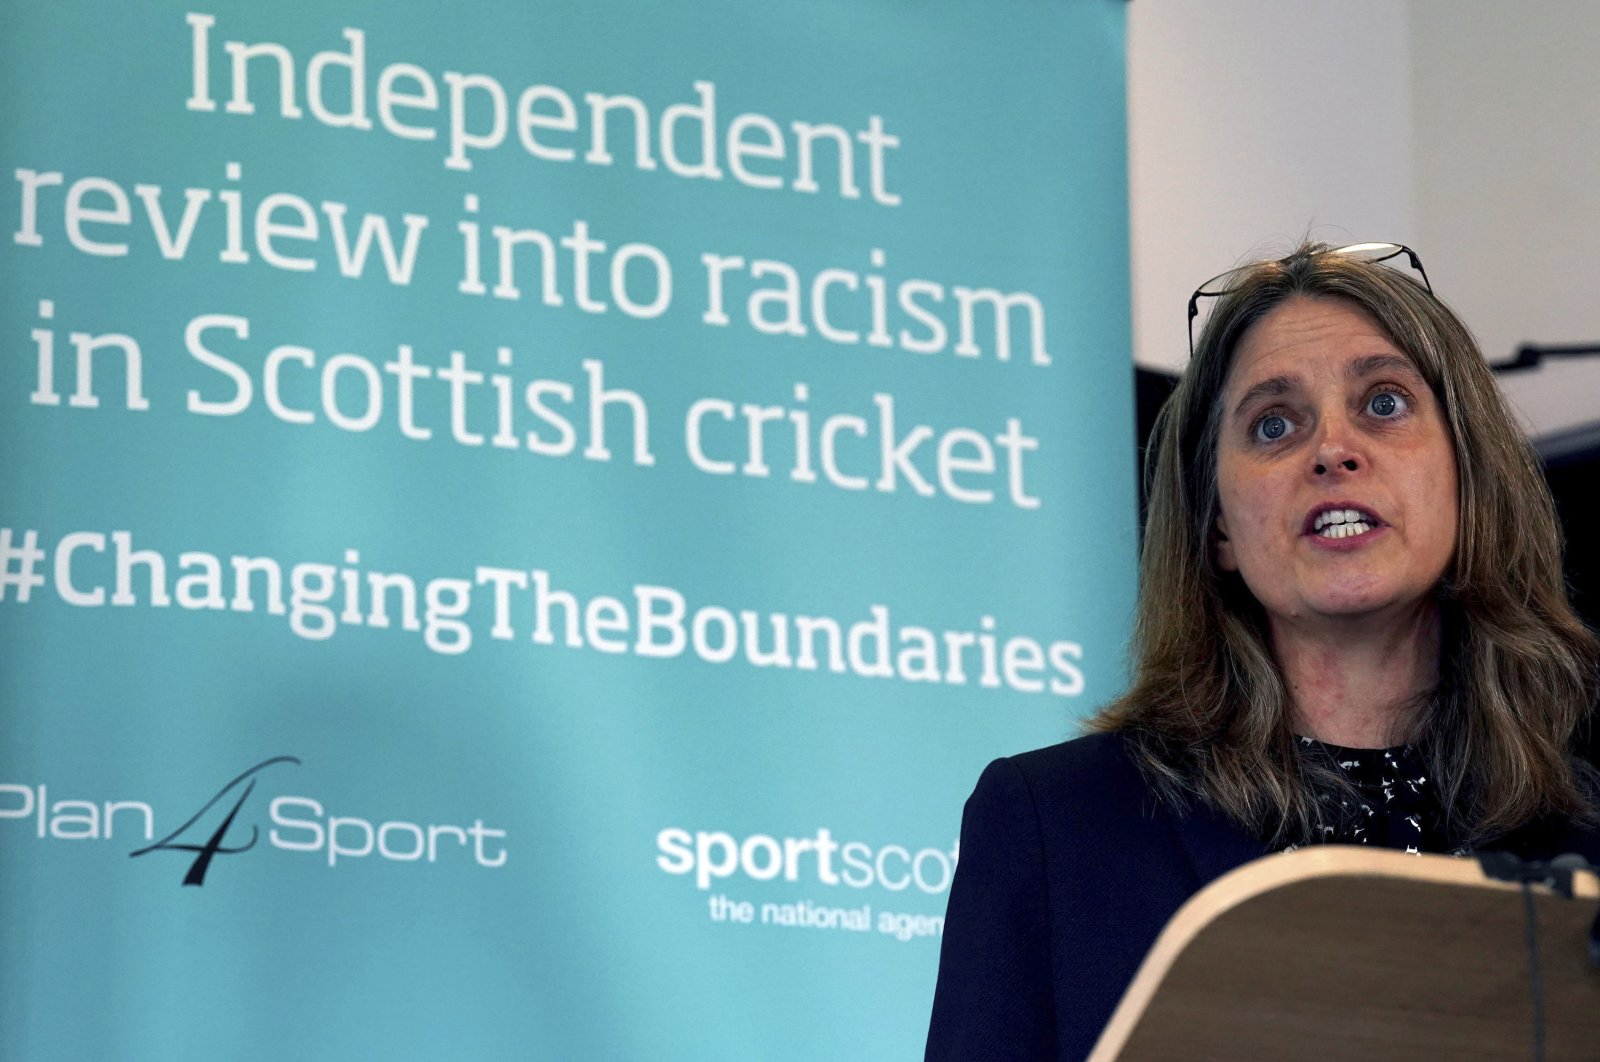 Louise Tideswell, managing director of Plan4Sport, speaks at a press conference, Stirling, Scotland, July 25, 2022. (AP Photo)